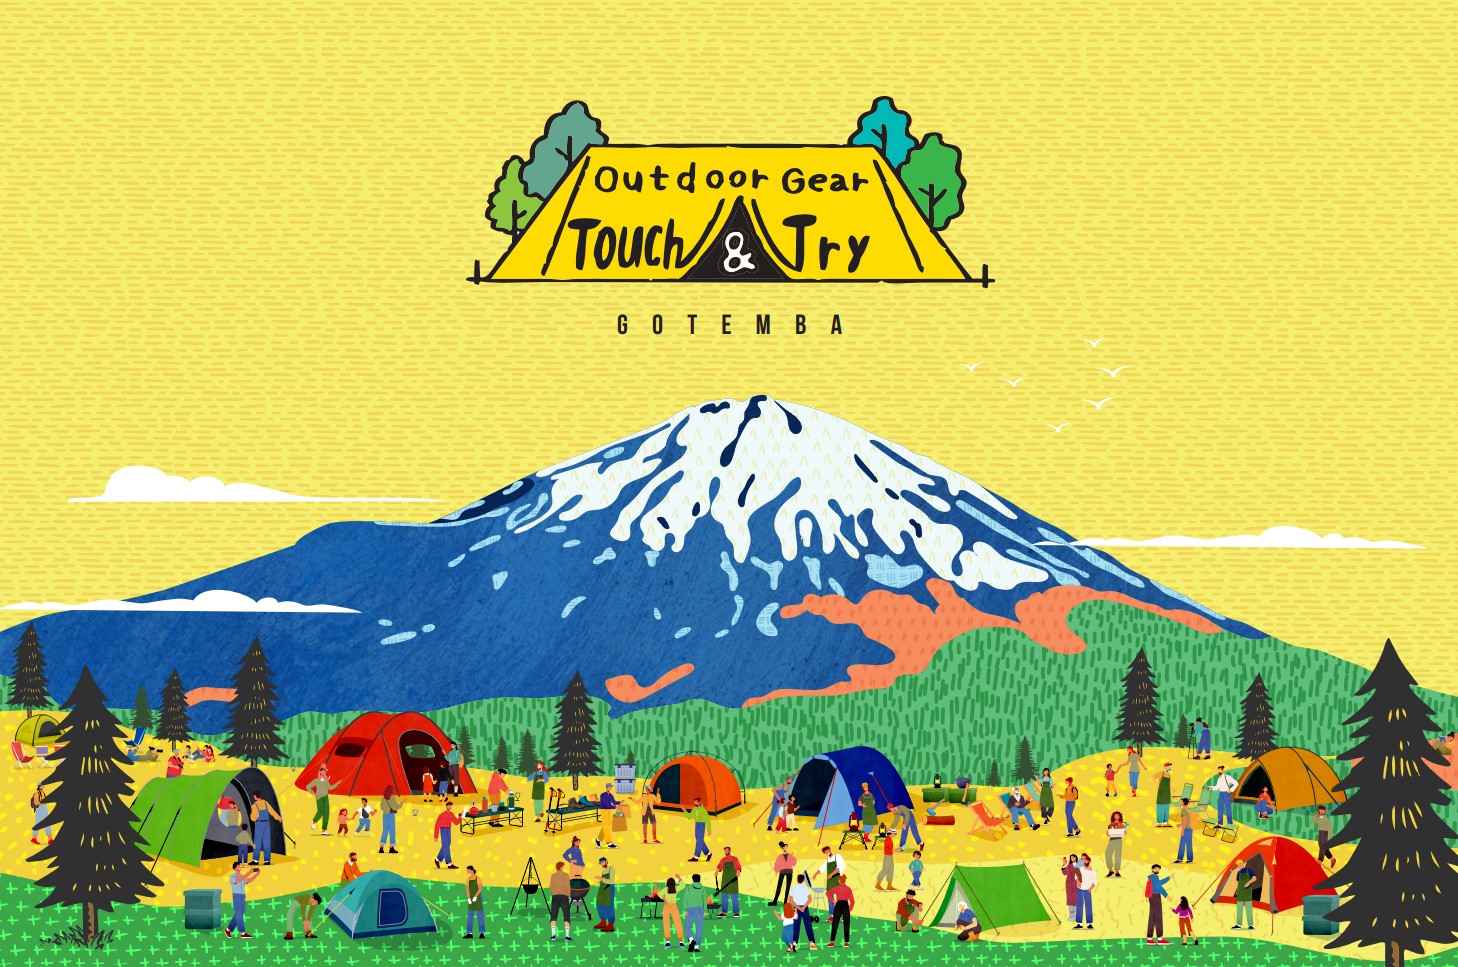 Outdoor Gear Touch & Try 2022